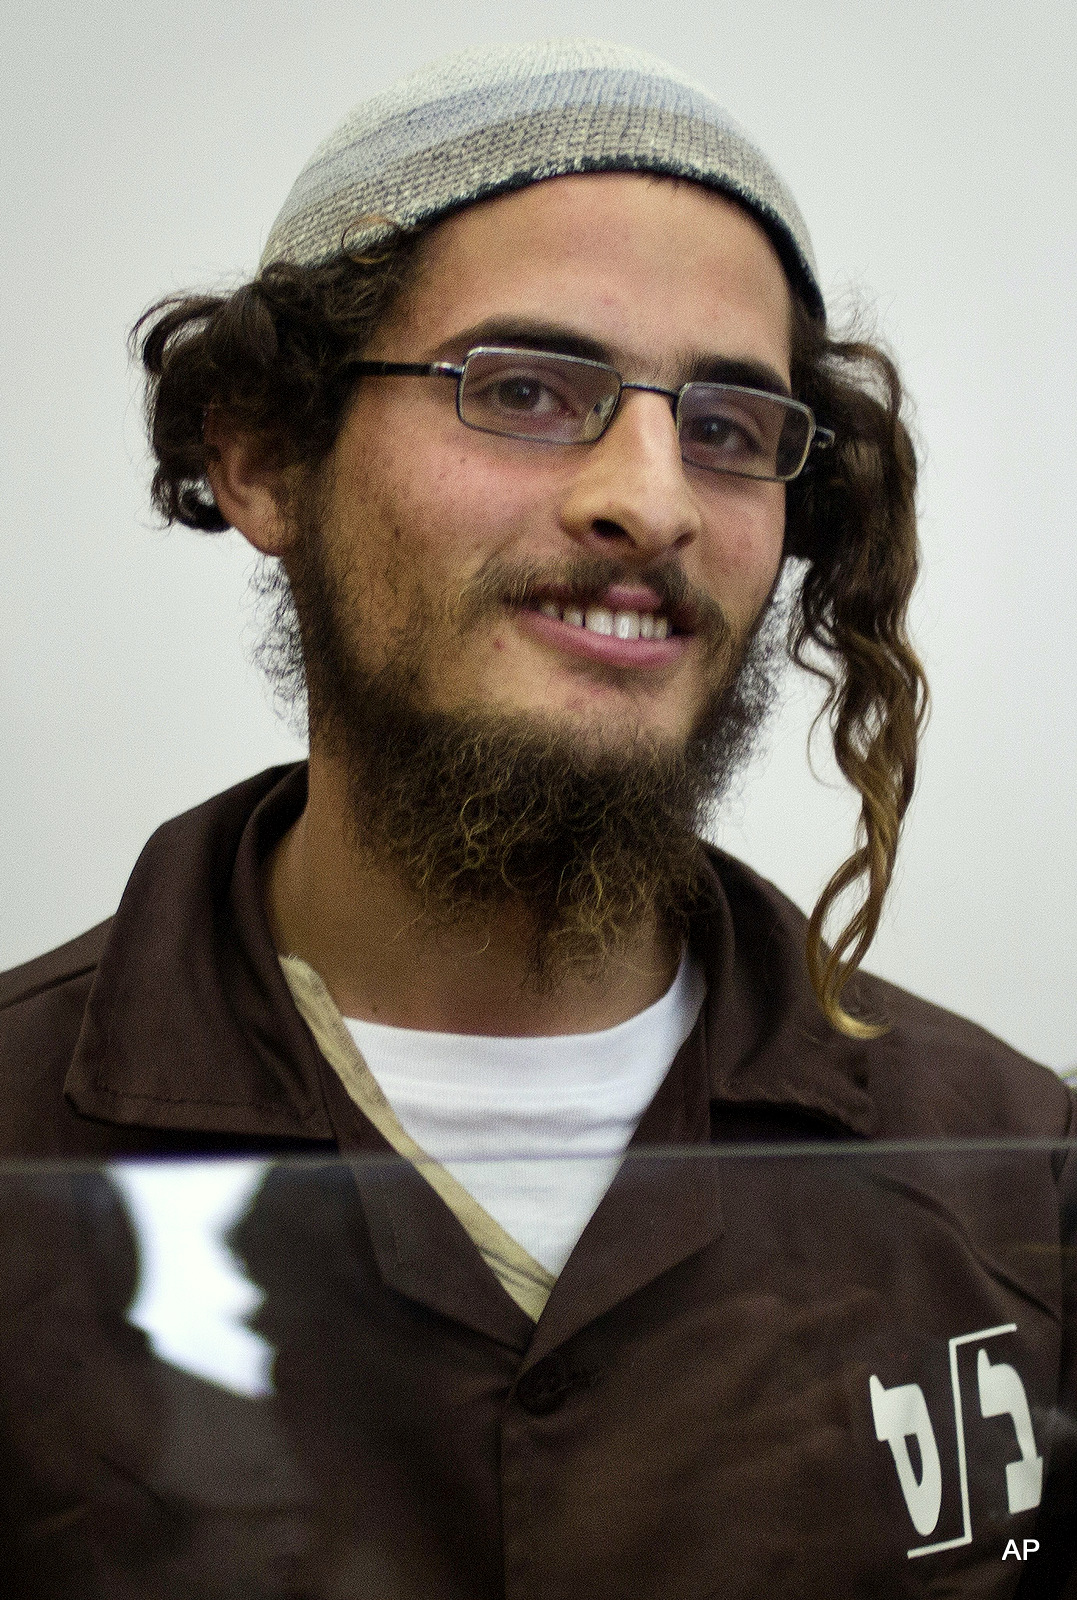 Head of a Jewish extremist group Meir Ettinger appears in court in Nazareth Illit , Israel